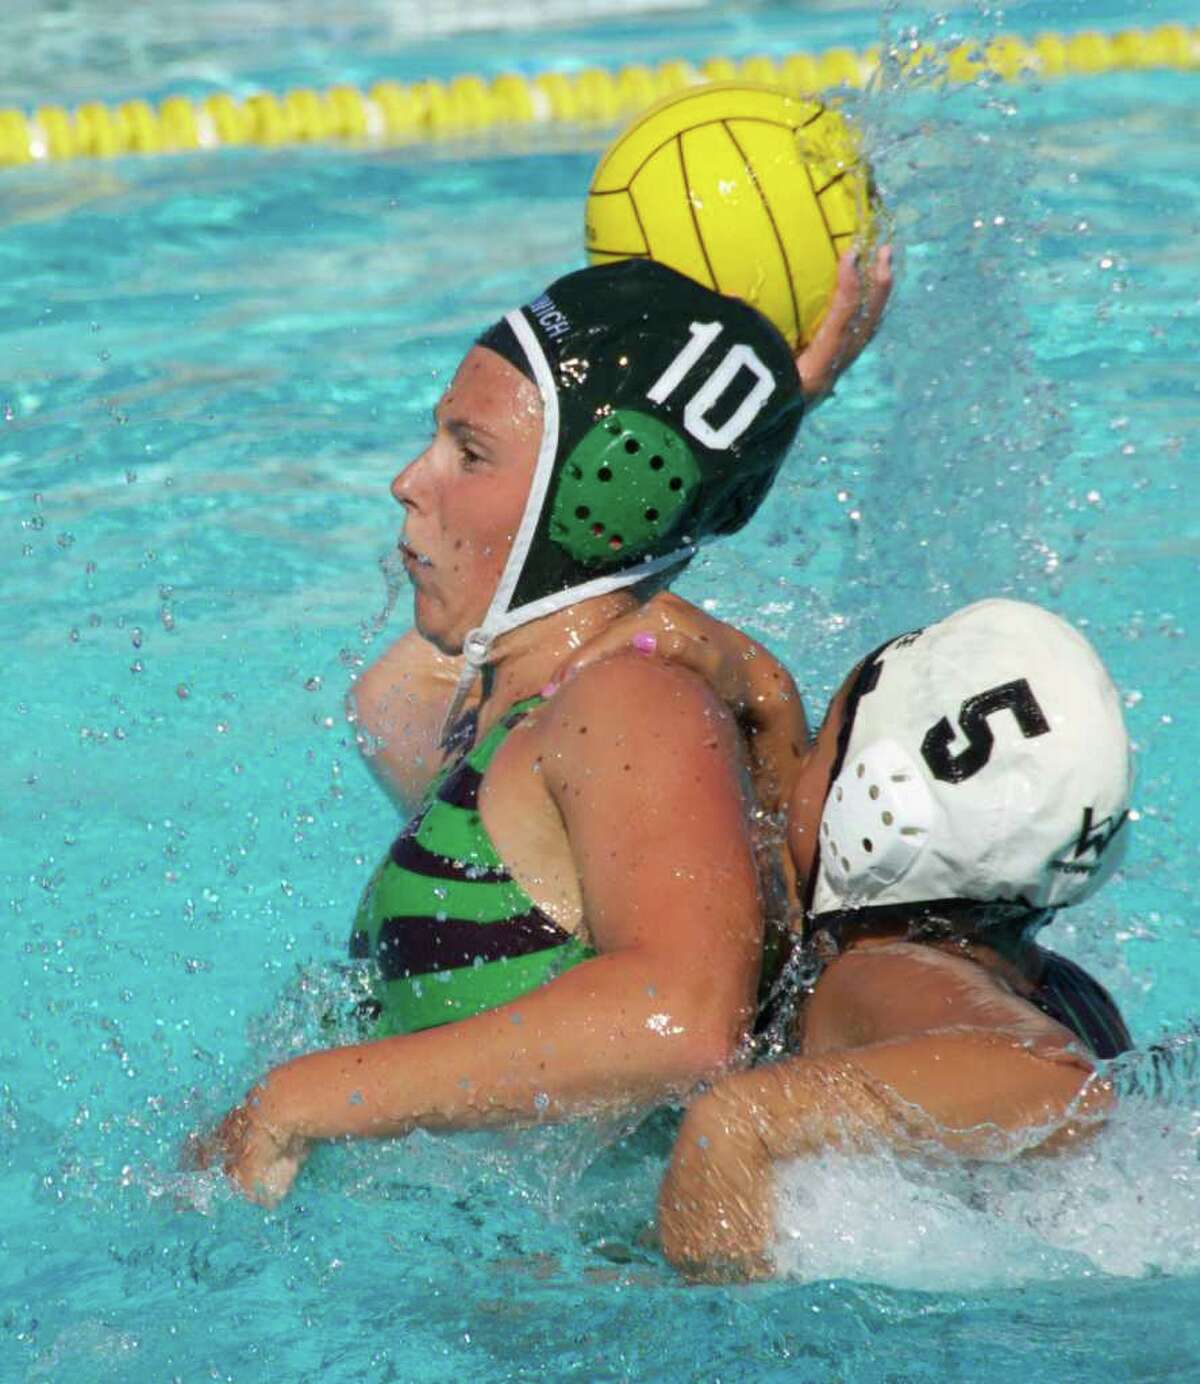 Greenwich Water Polo's Paige Neary (10) had five goals in the U-14 team's 9-6 win over Los Angeles and two goals in an 8-6 win over the Elite Water Polo Club from Murrieta, Calif.